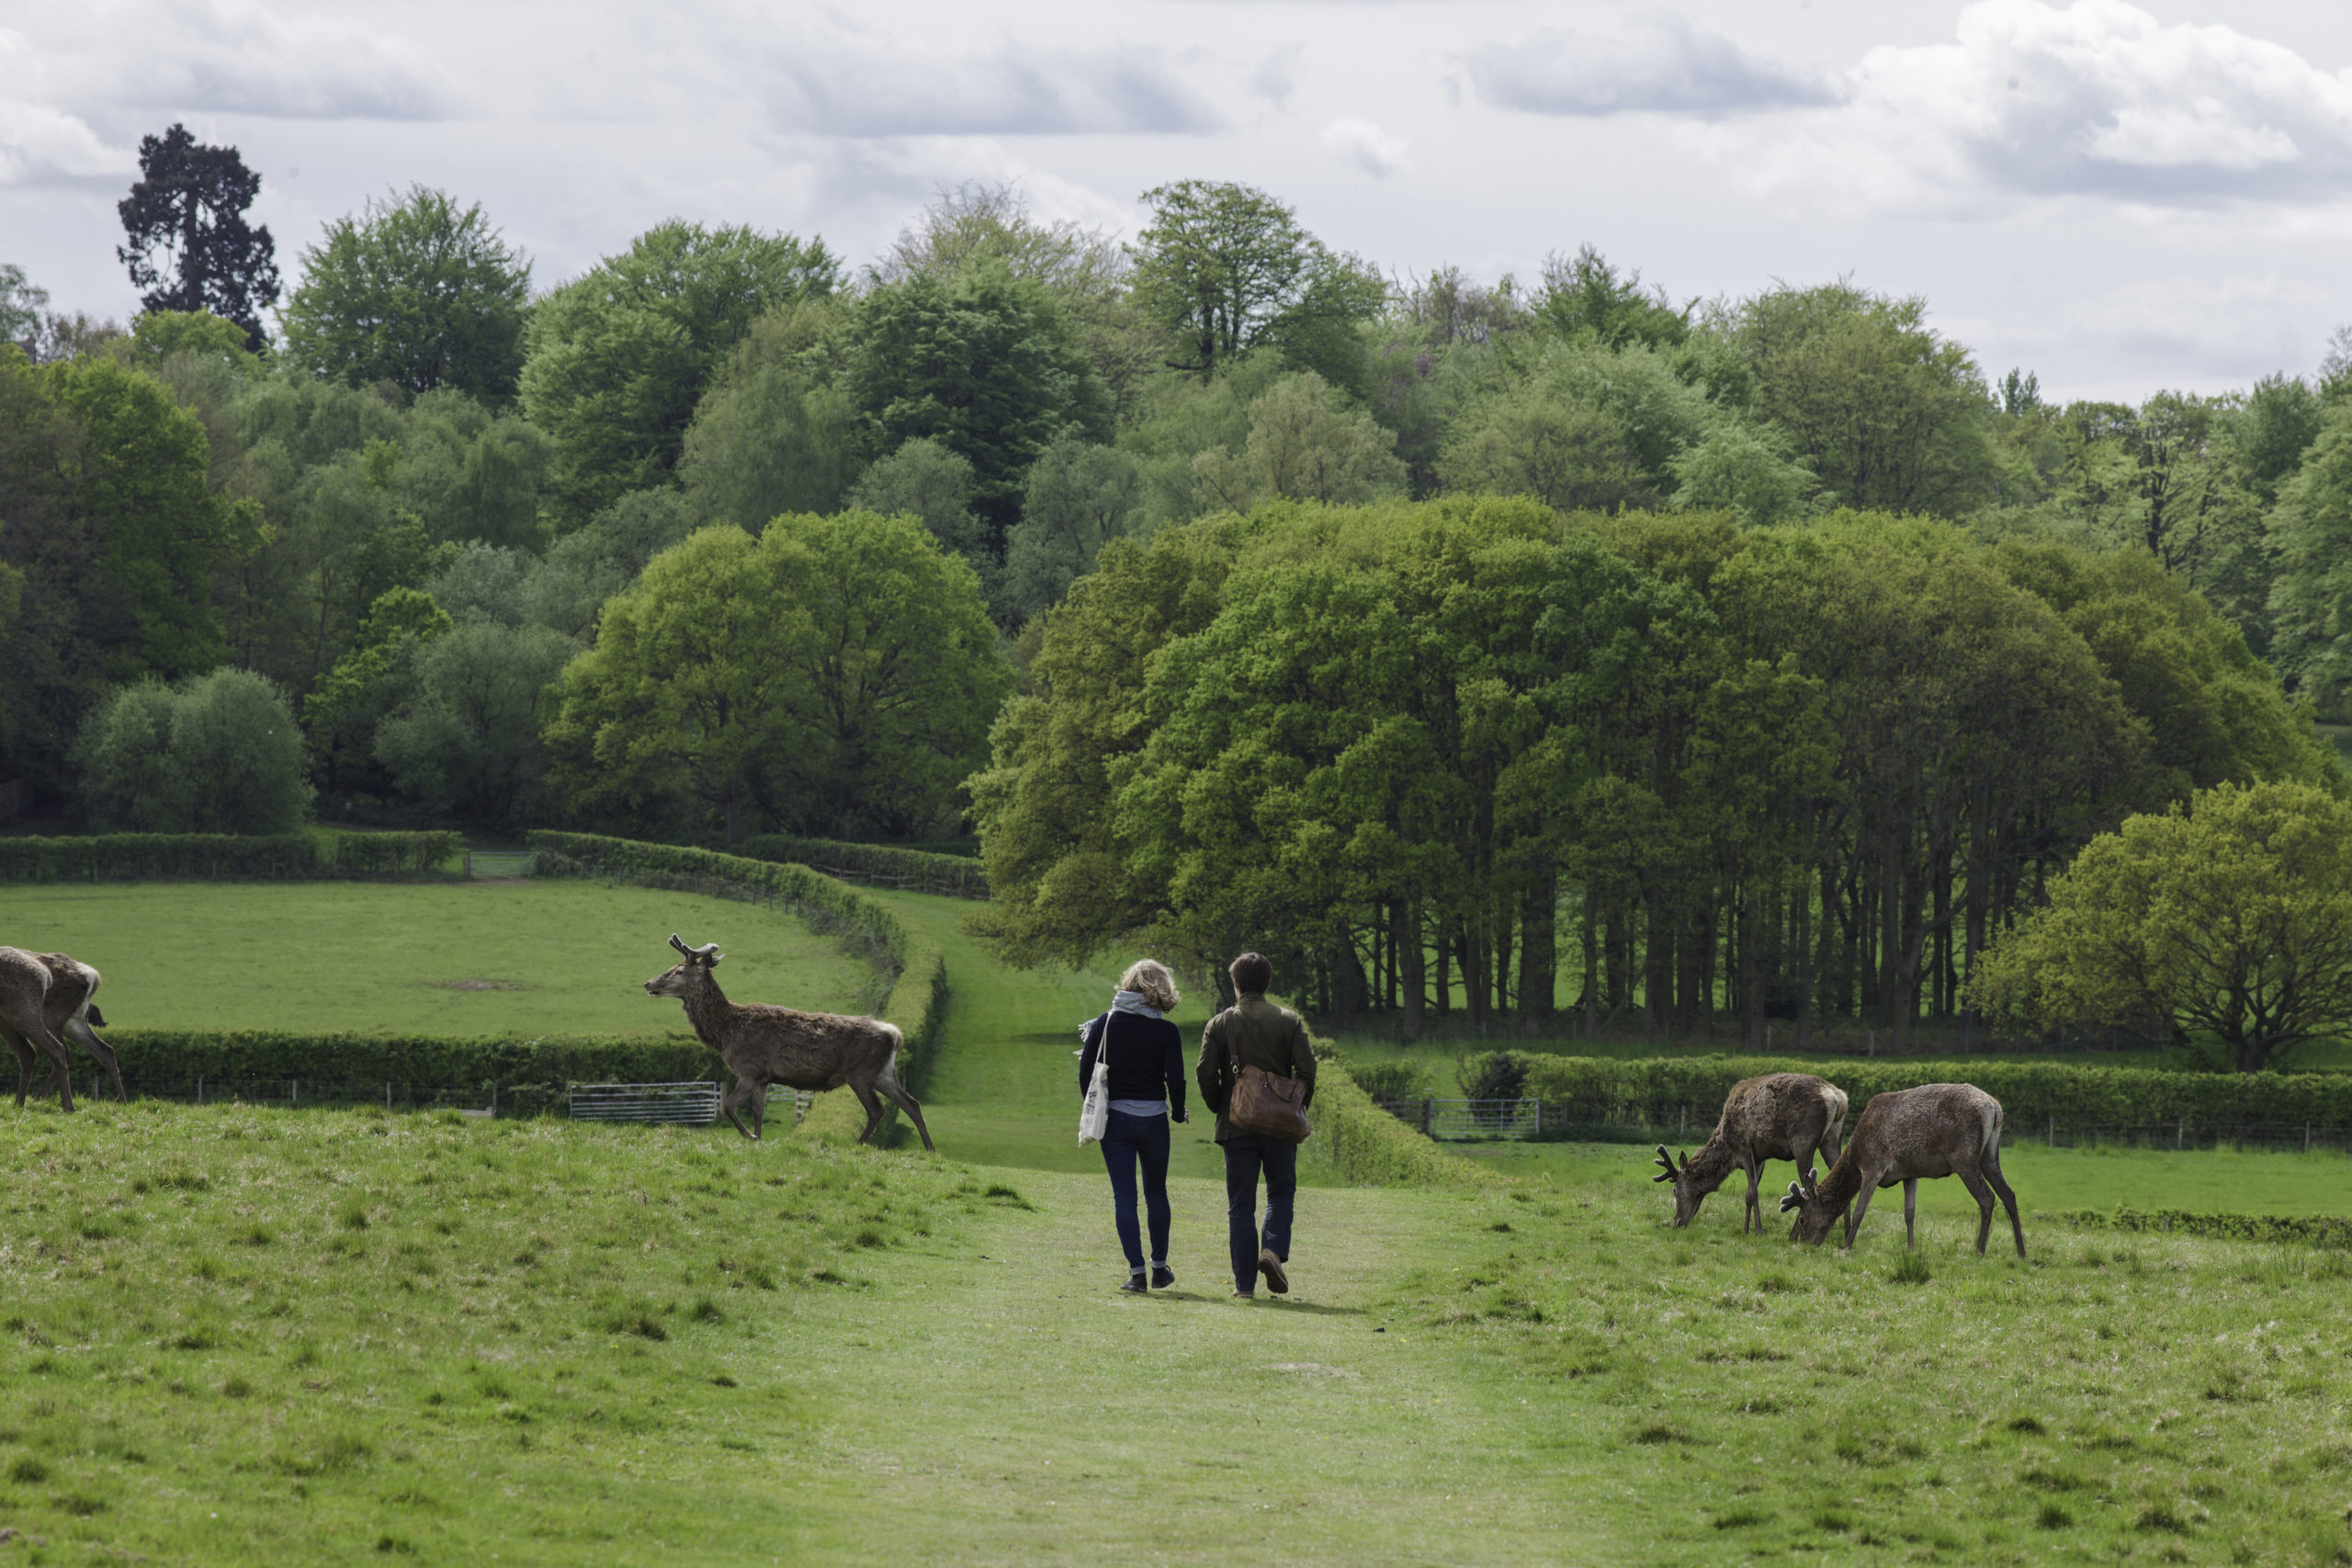 Two people walking in a field with deer either side of the path.